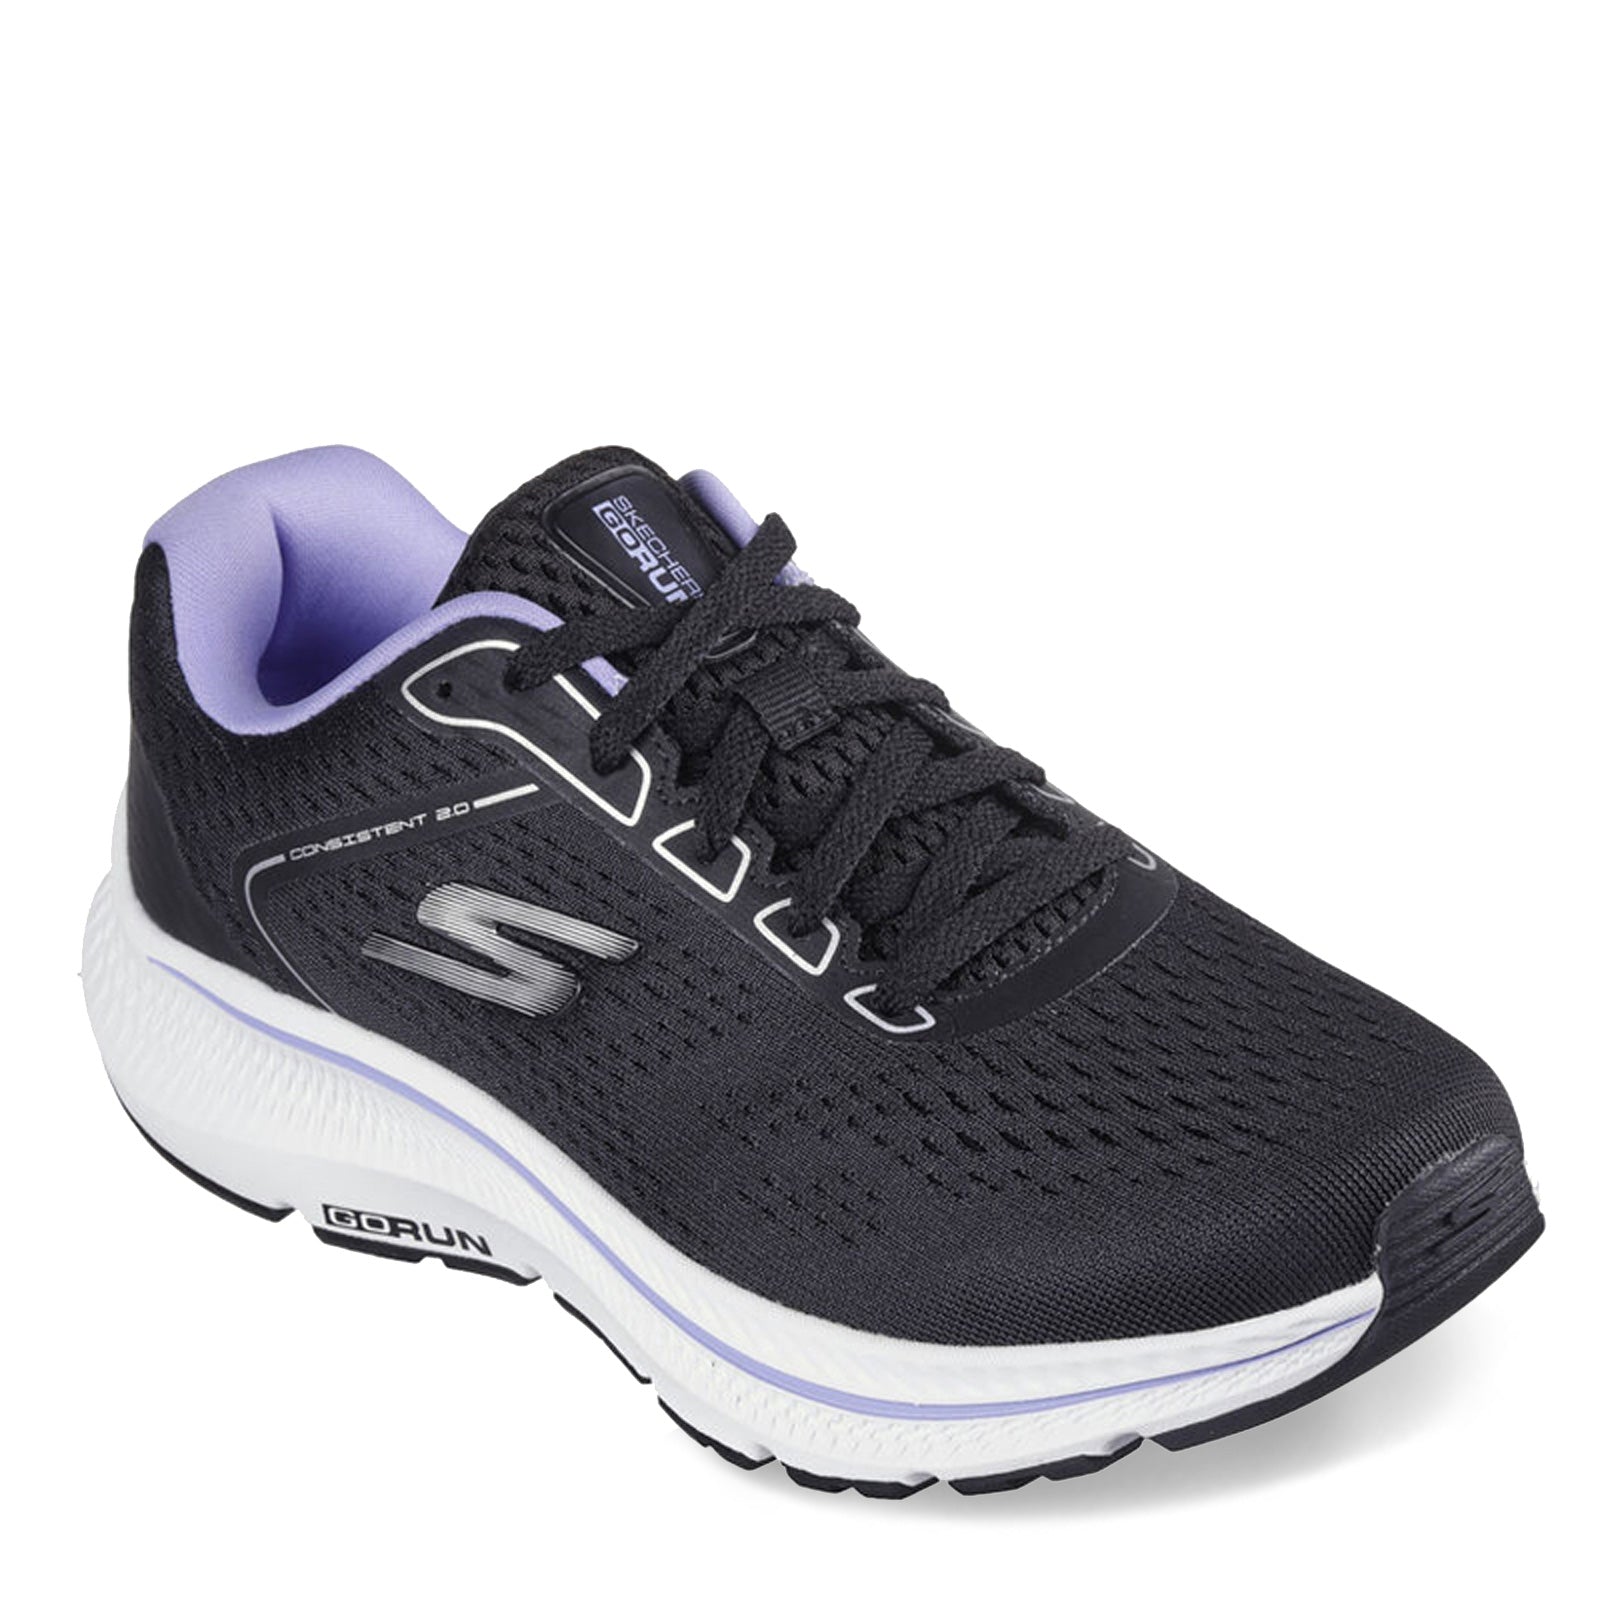 Skechers Women's Performance GoRun Consistant Athletic Sneaker, Wide Width  Available